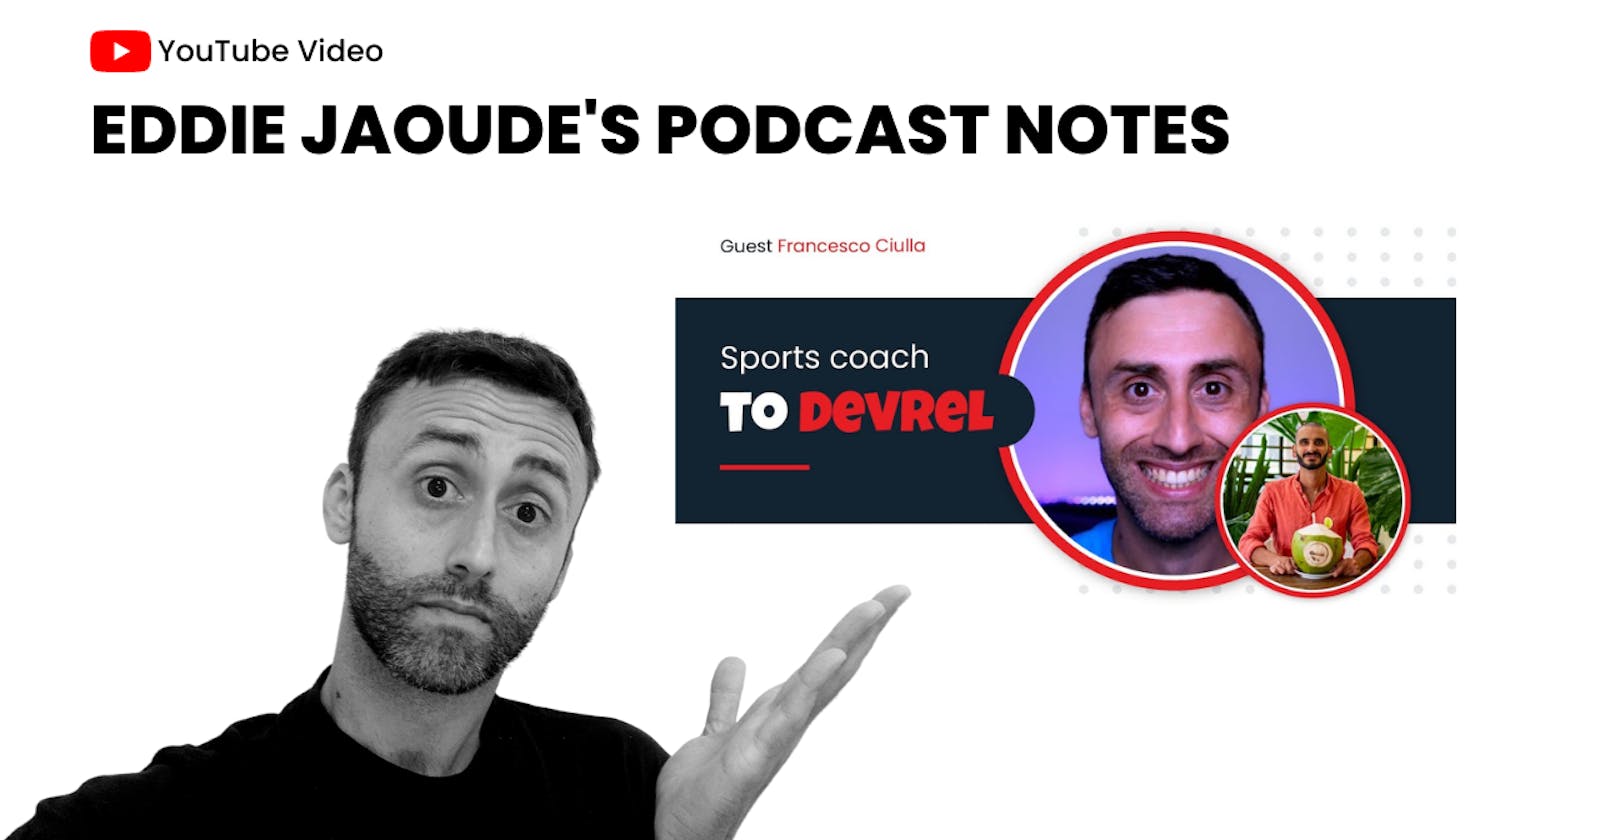 Eddie Jaoude's Podcast Notes